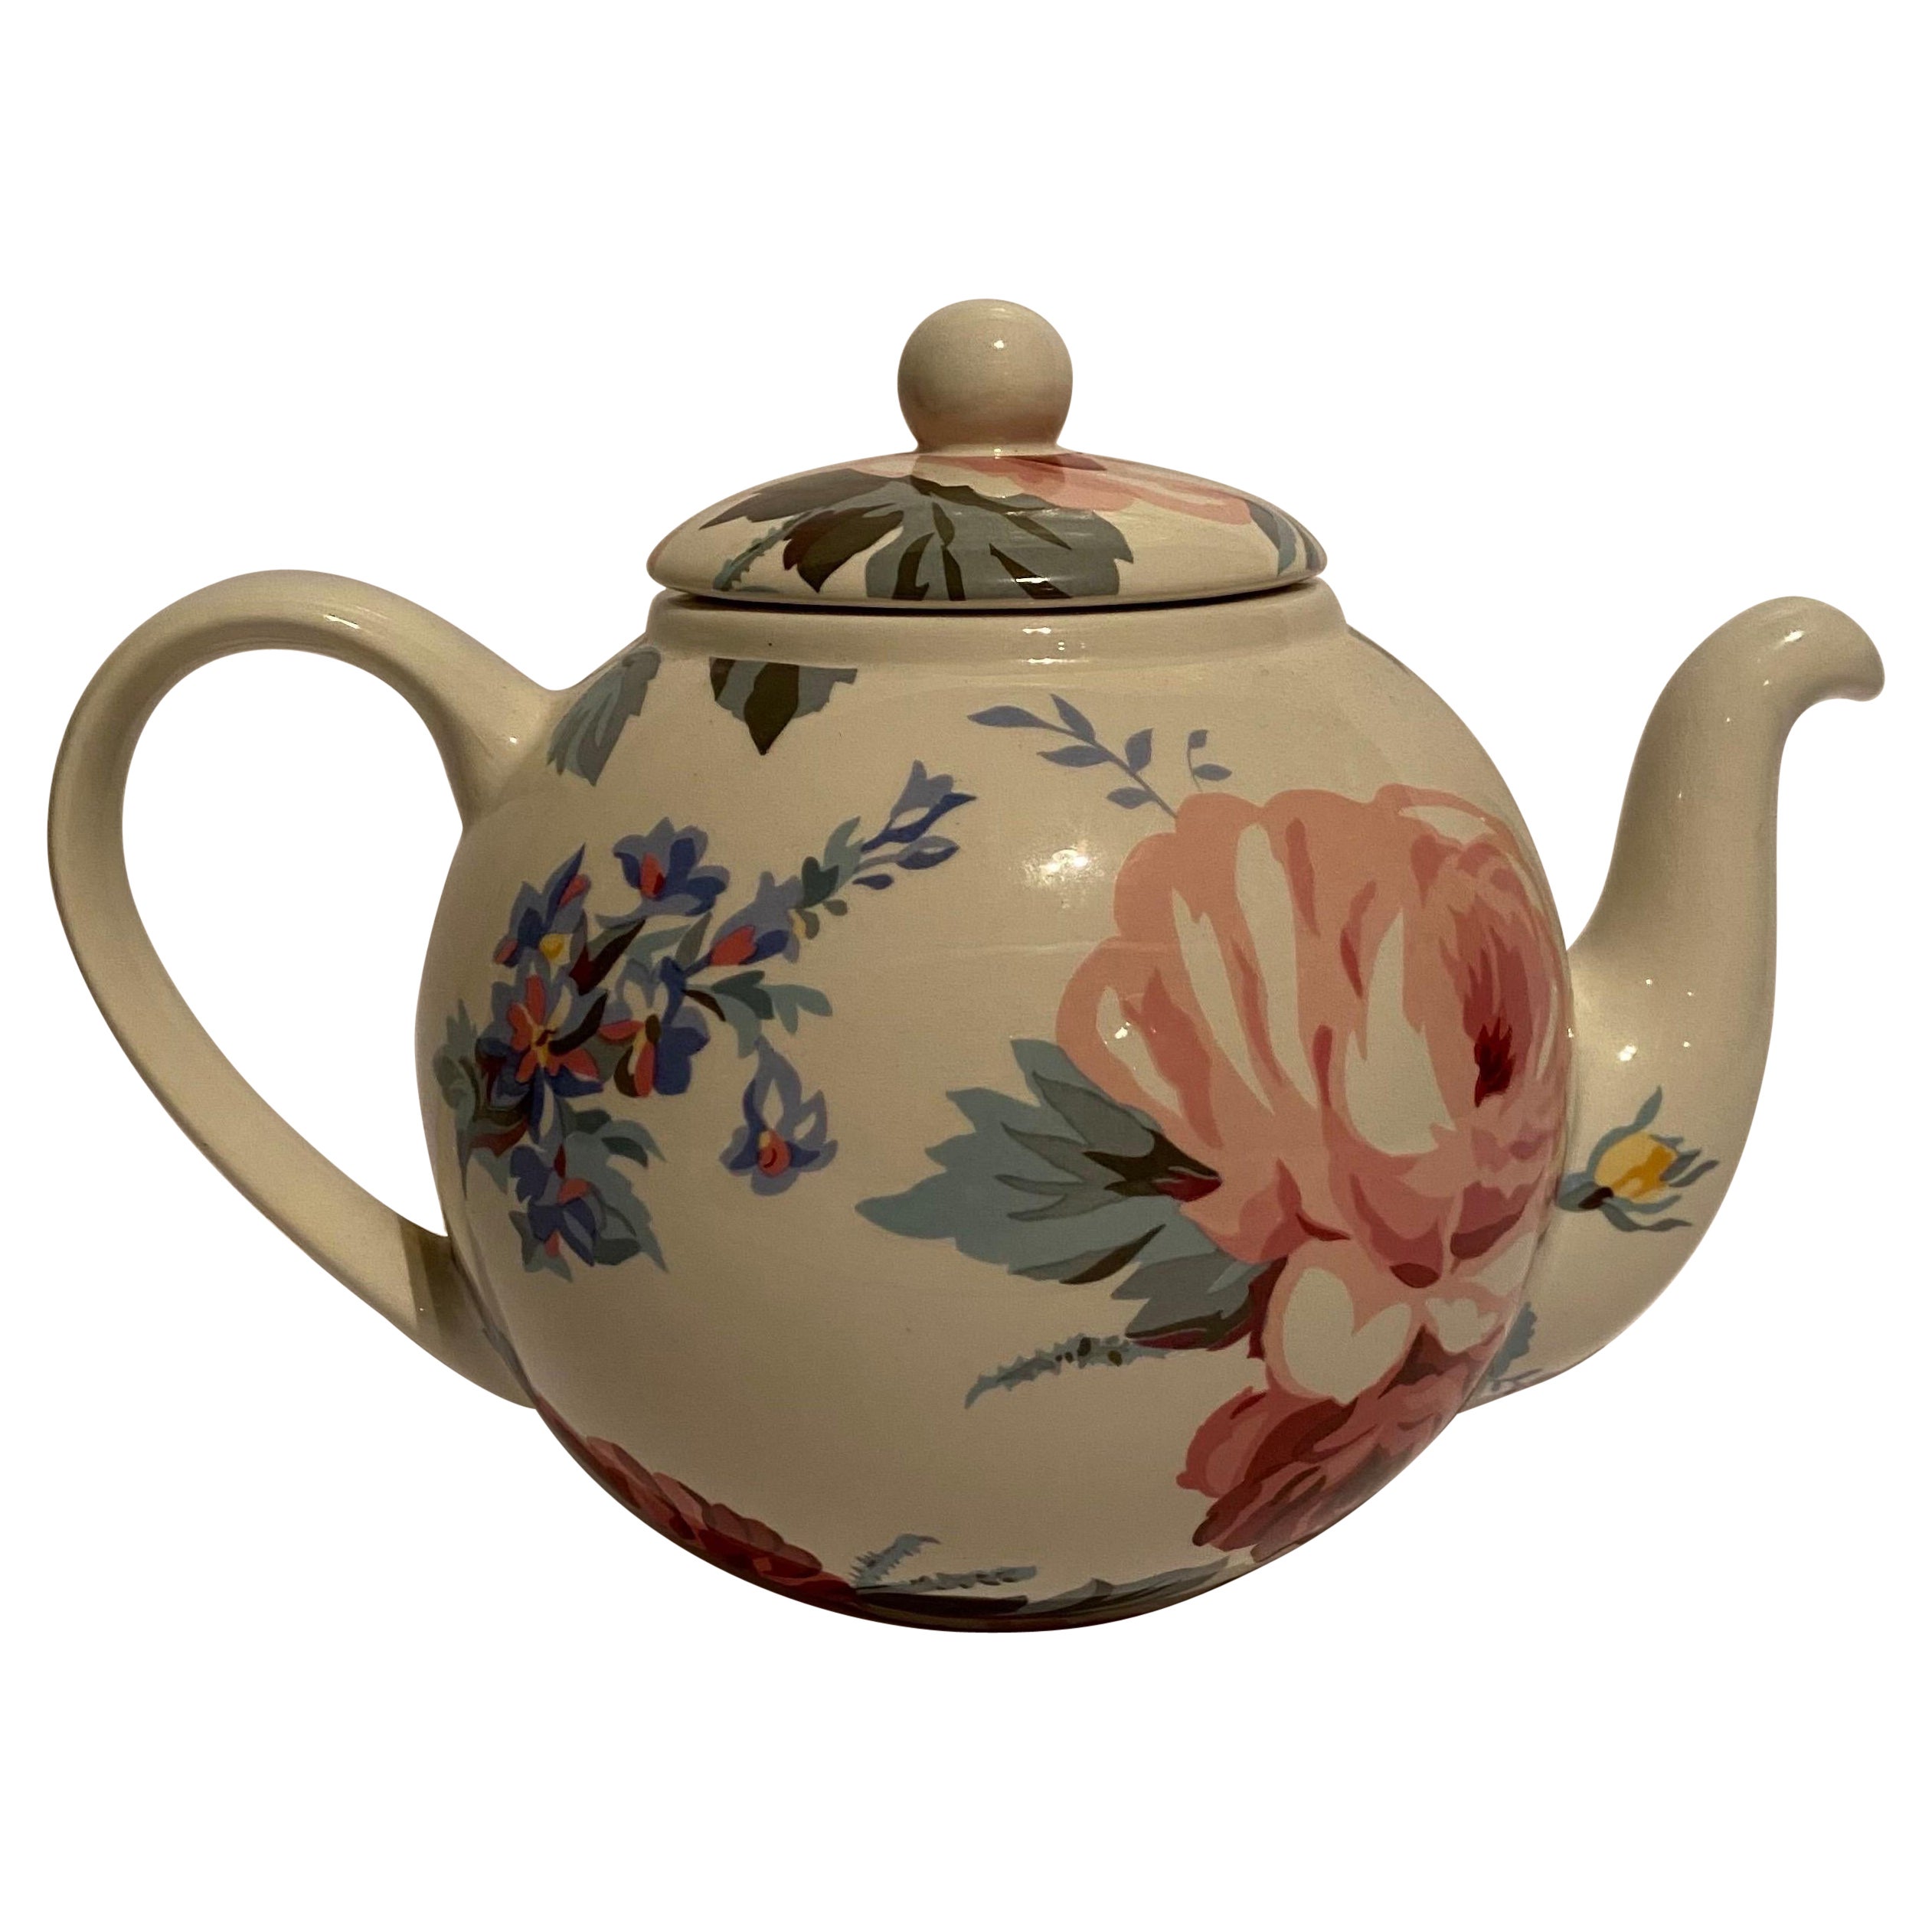 Ralph Lauren Home Kirsty Floral Teapot and Lid For Sale at 1stDibs